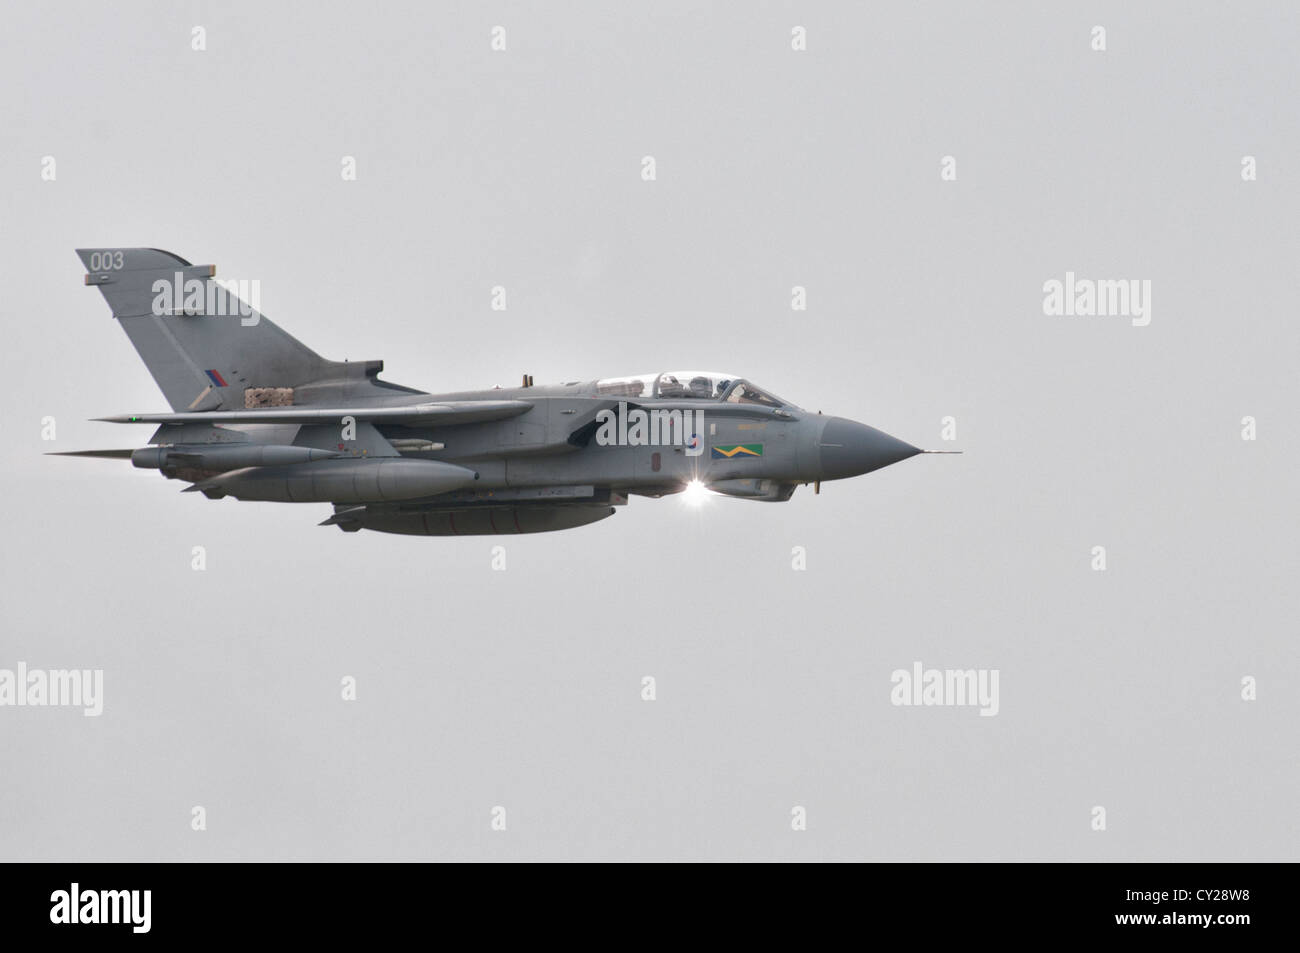 Panavia Tornado GR4A ZA369 / 003  from Royal Air Force 15 Squadron RAF Lossiemouth makes a high speed pass while displaying Stock Photo